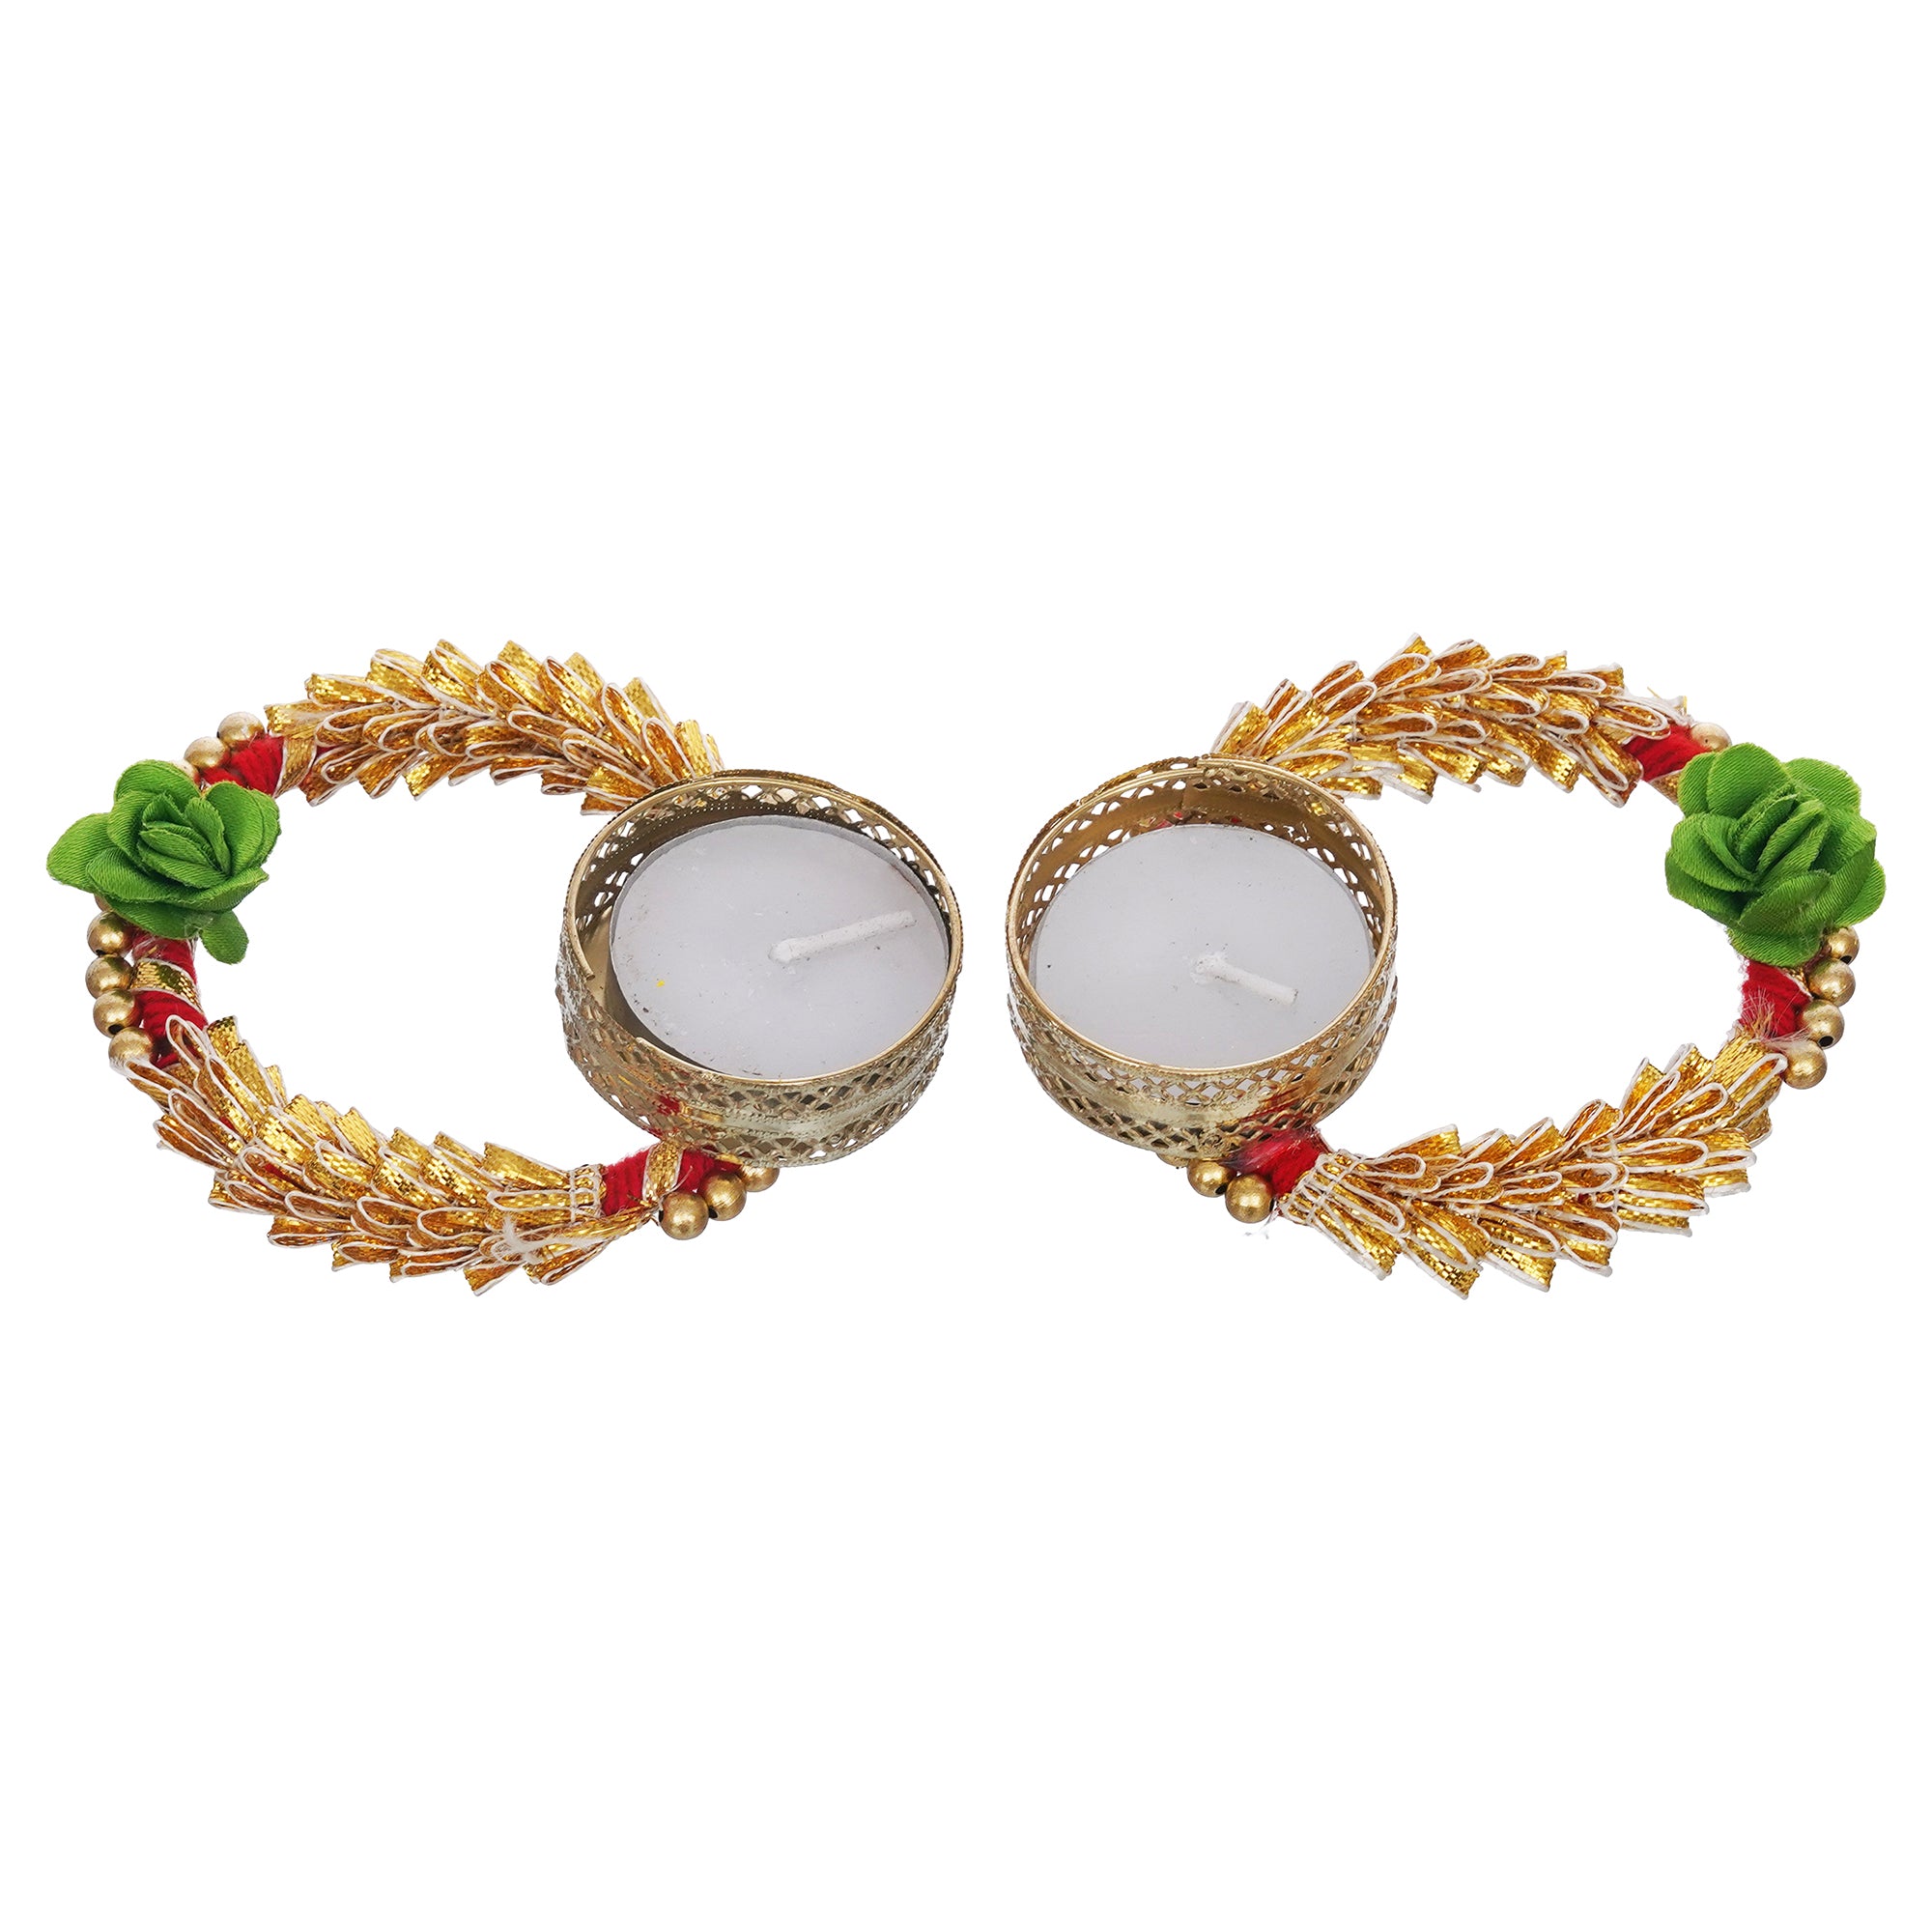 eCraftIndia Set of 2 Green and Golden Round Shaped Floral Decorative Tea Light Candle Holders 2